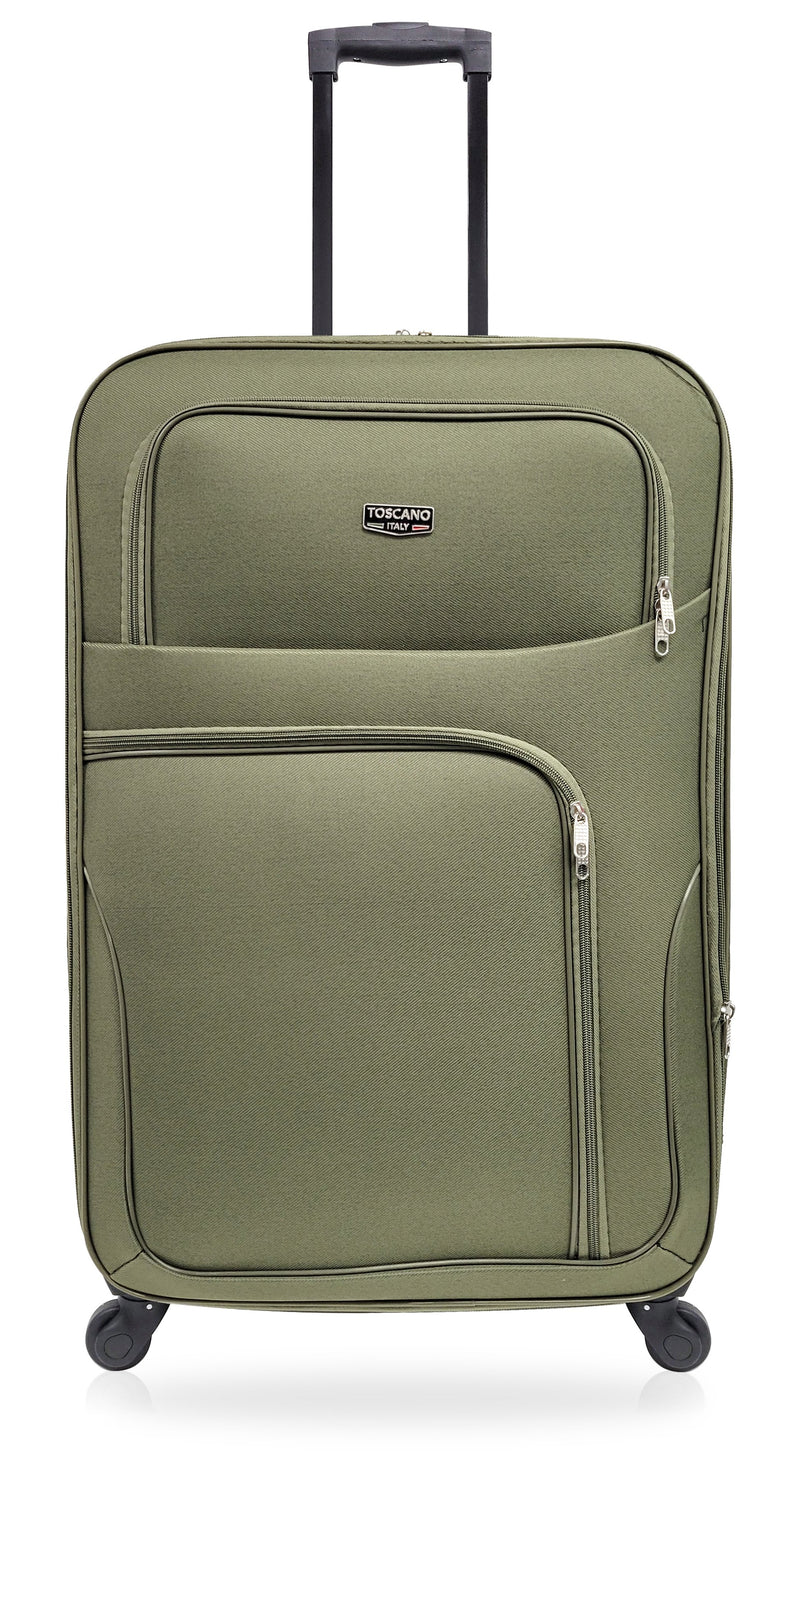 TOSCANO by Tucci 28-inch Allacciare  Lightweight Luggage Suitcase